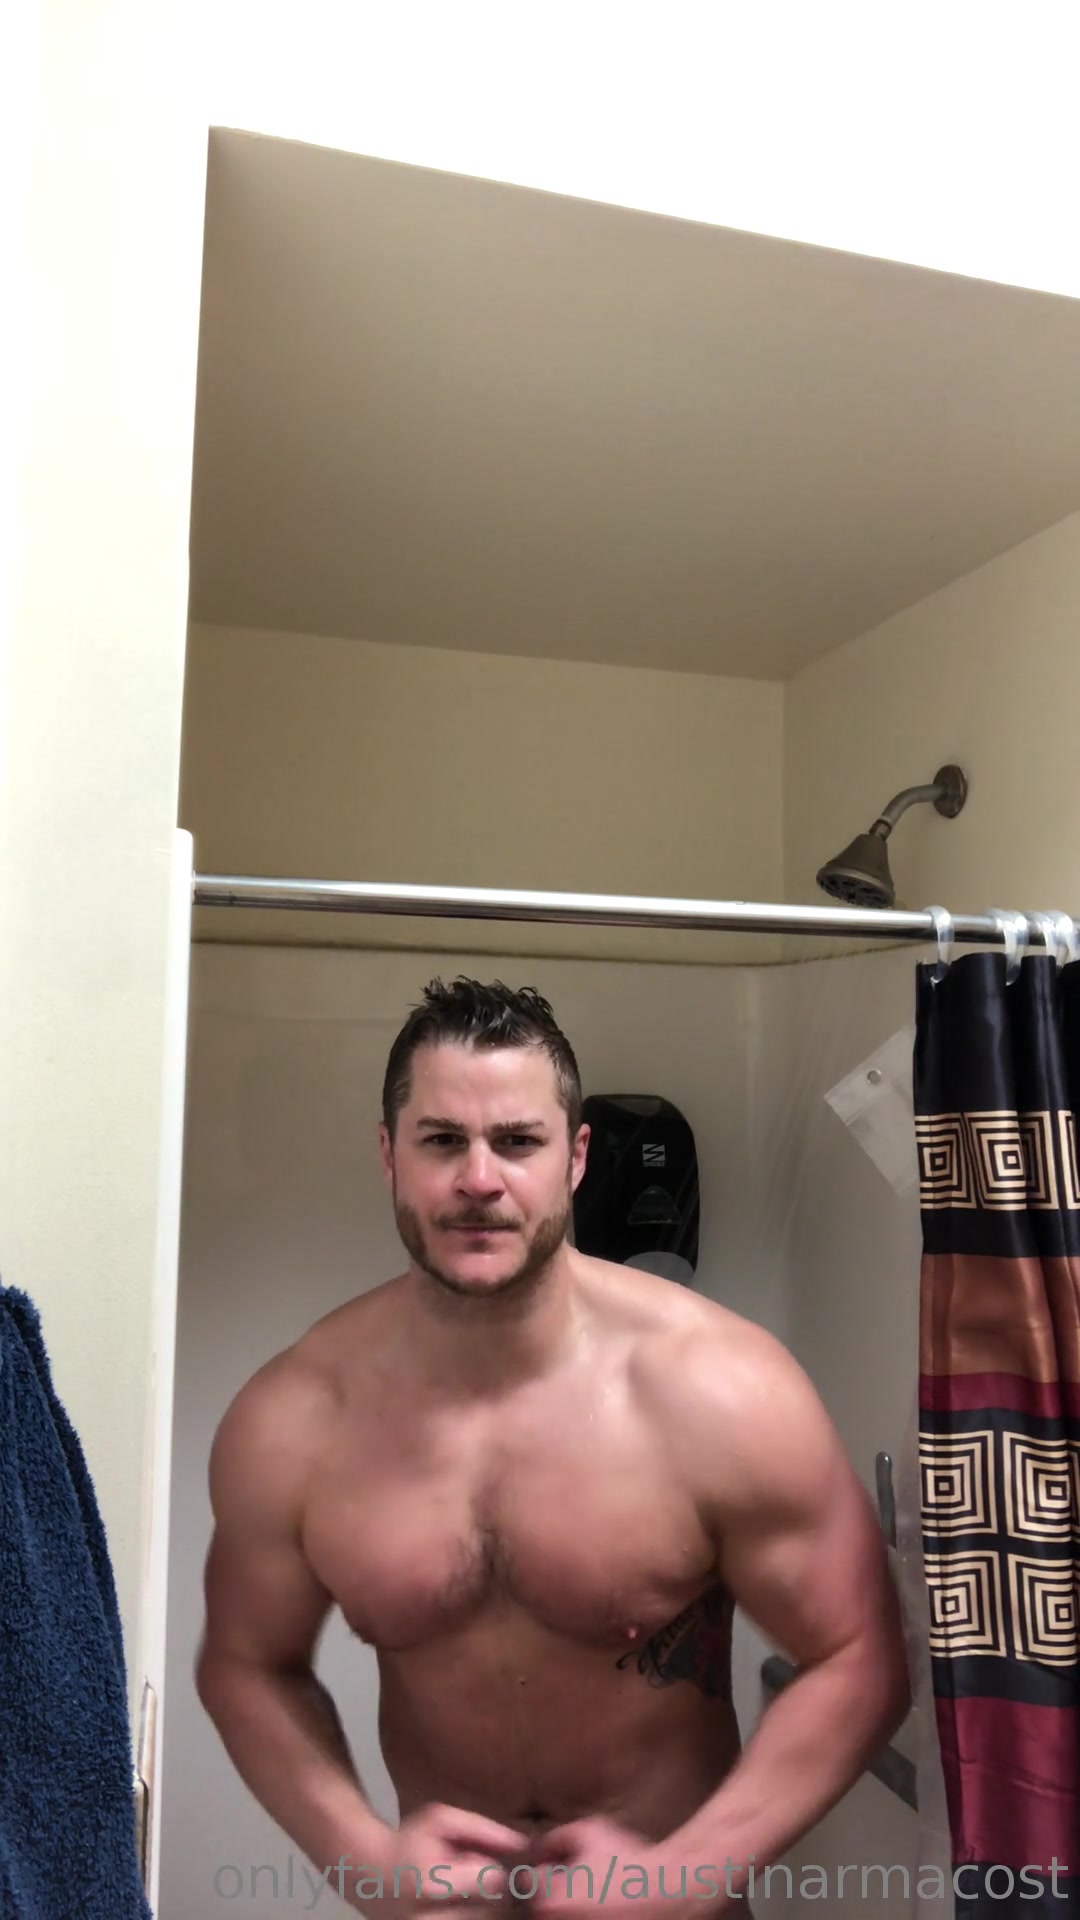 AUSTIN IN THE SHOWER SO SEXY